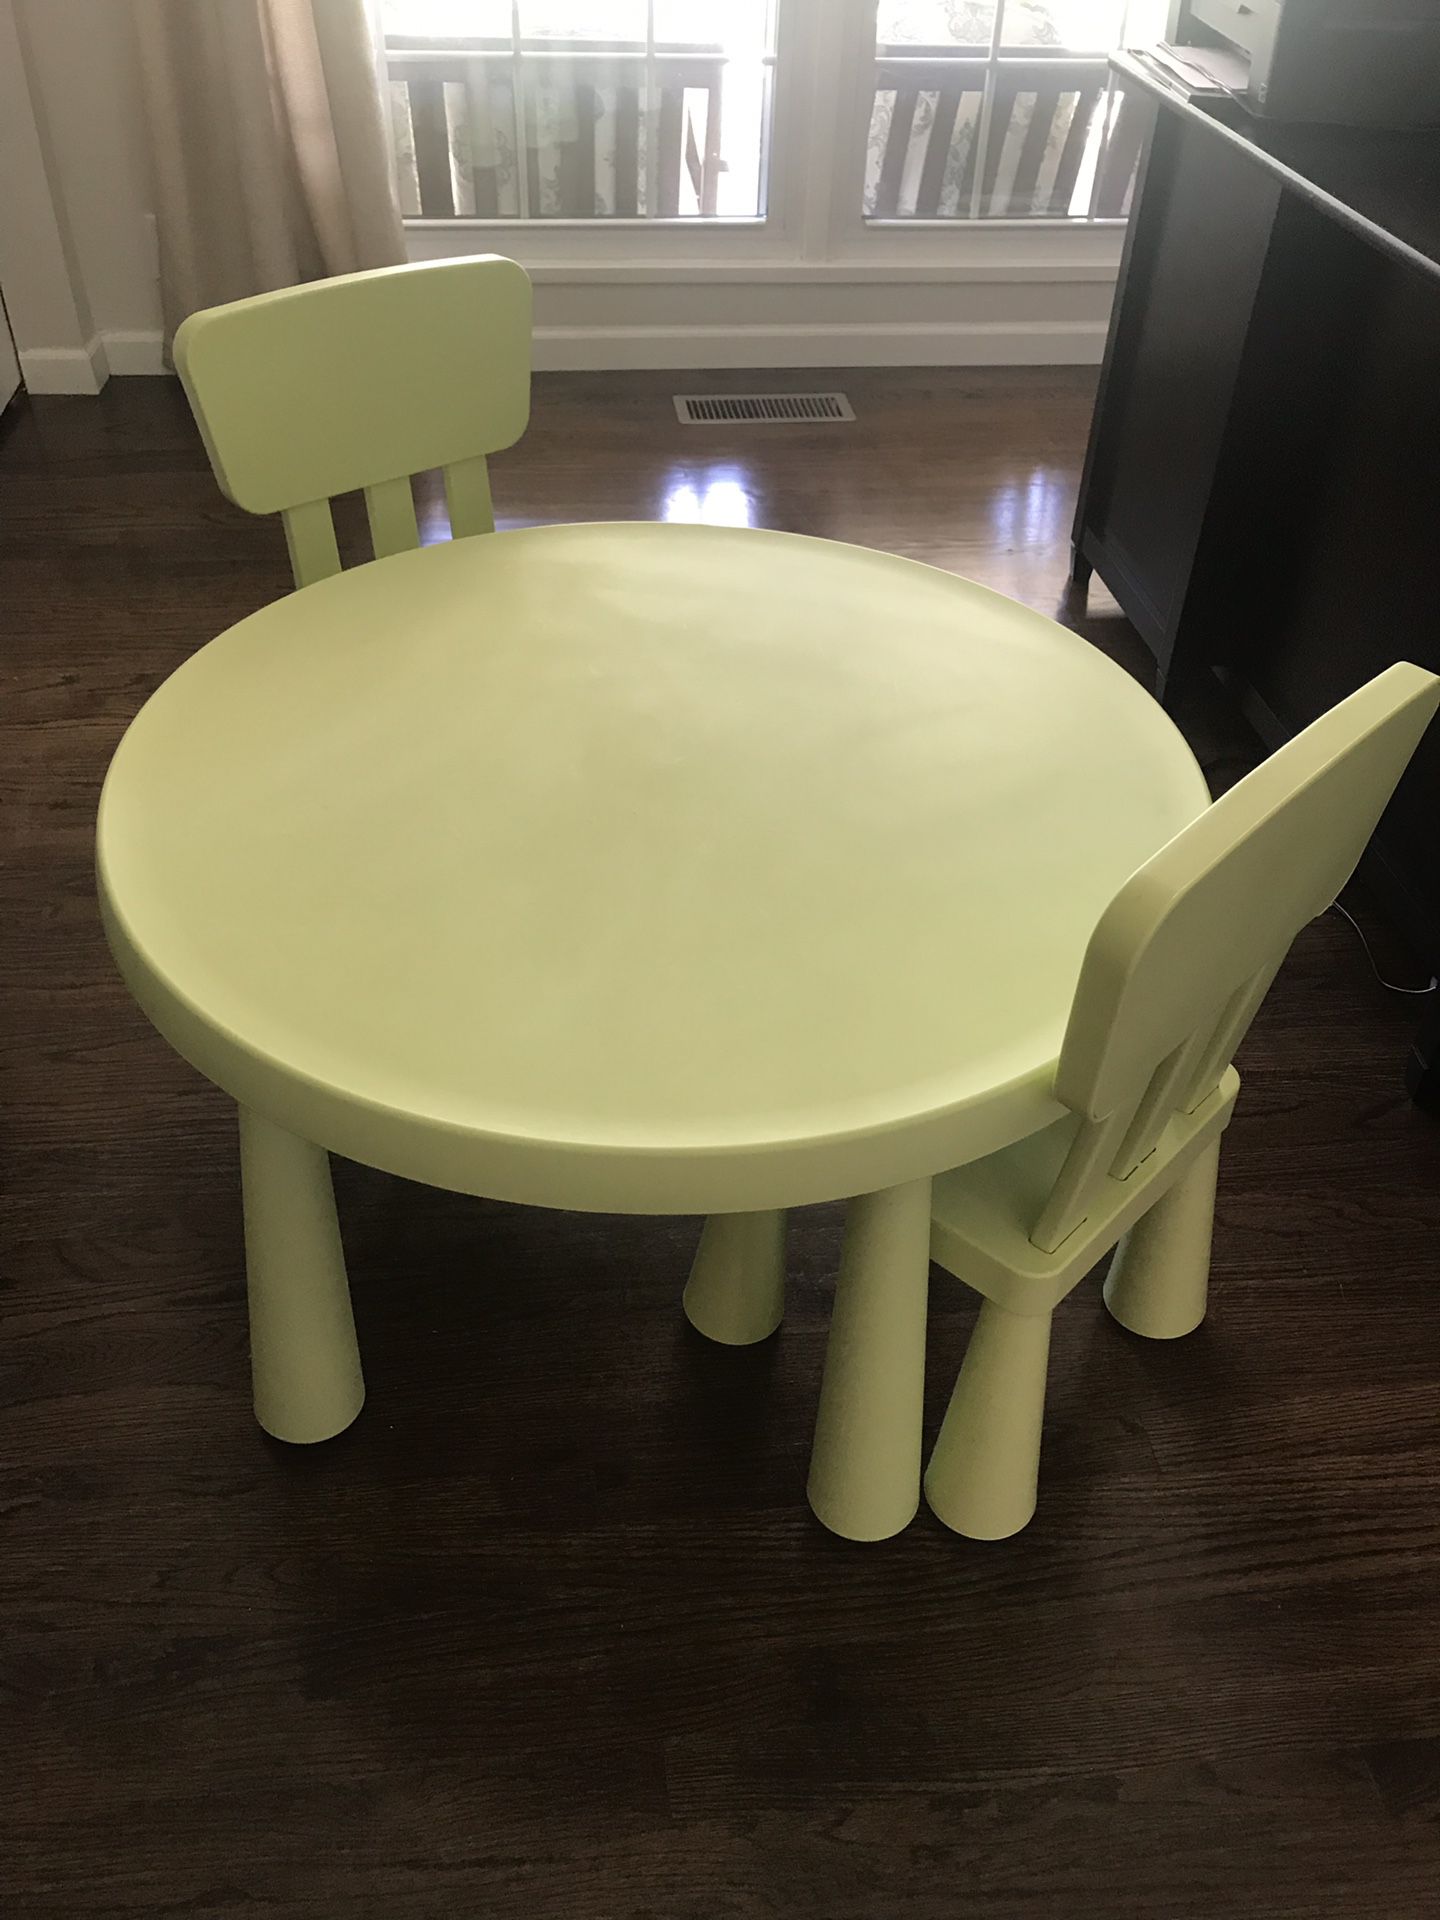 Ikea Kids Table and Chairs